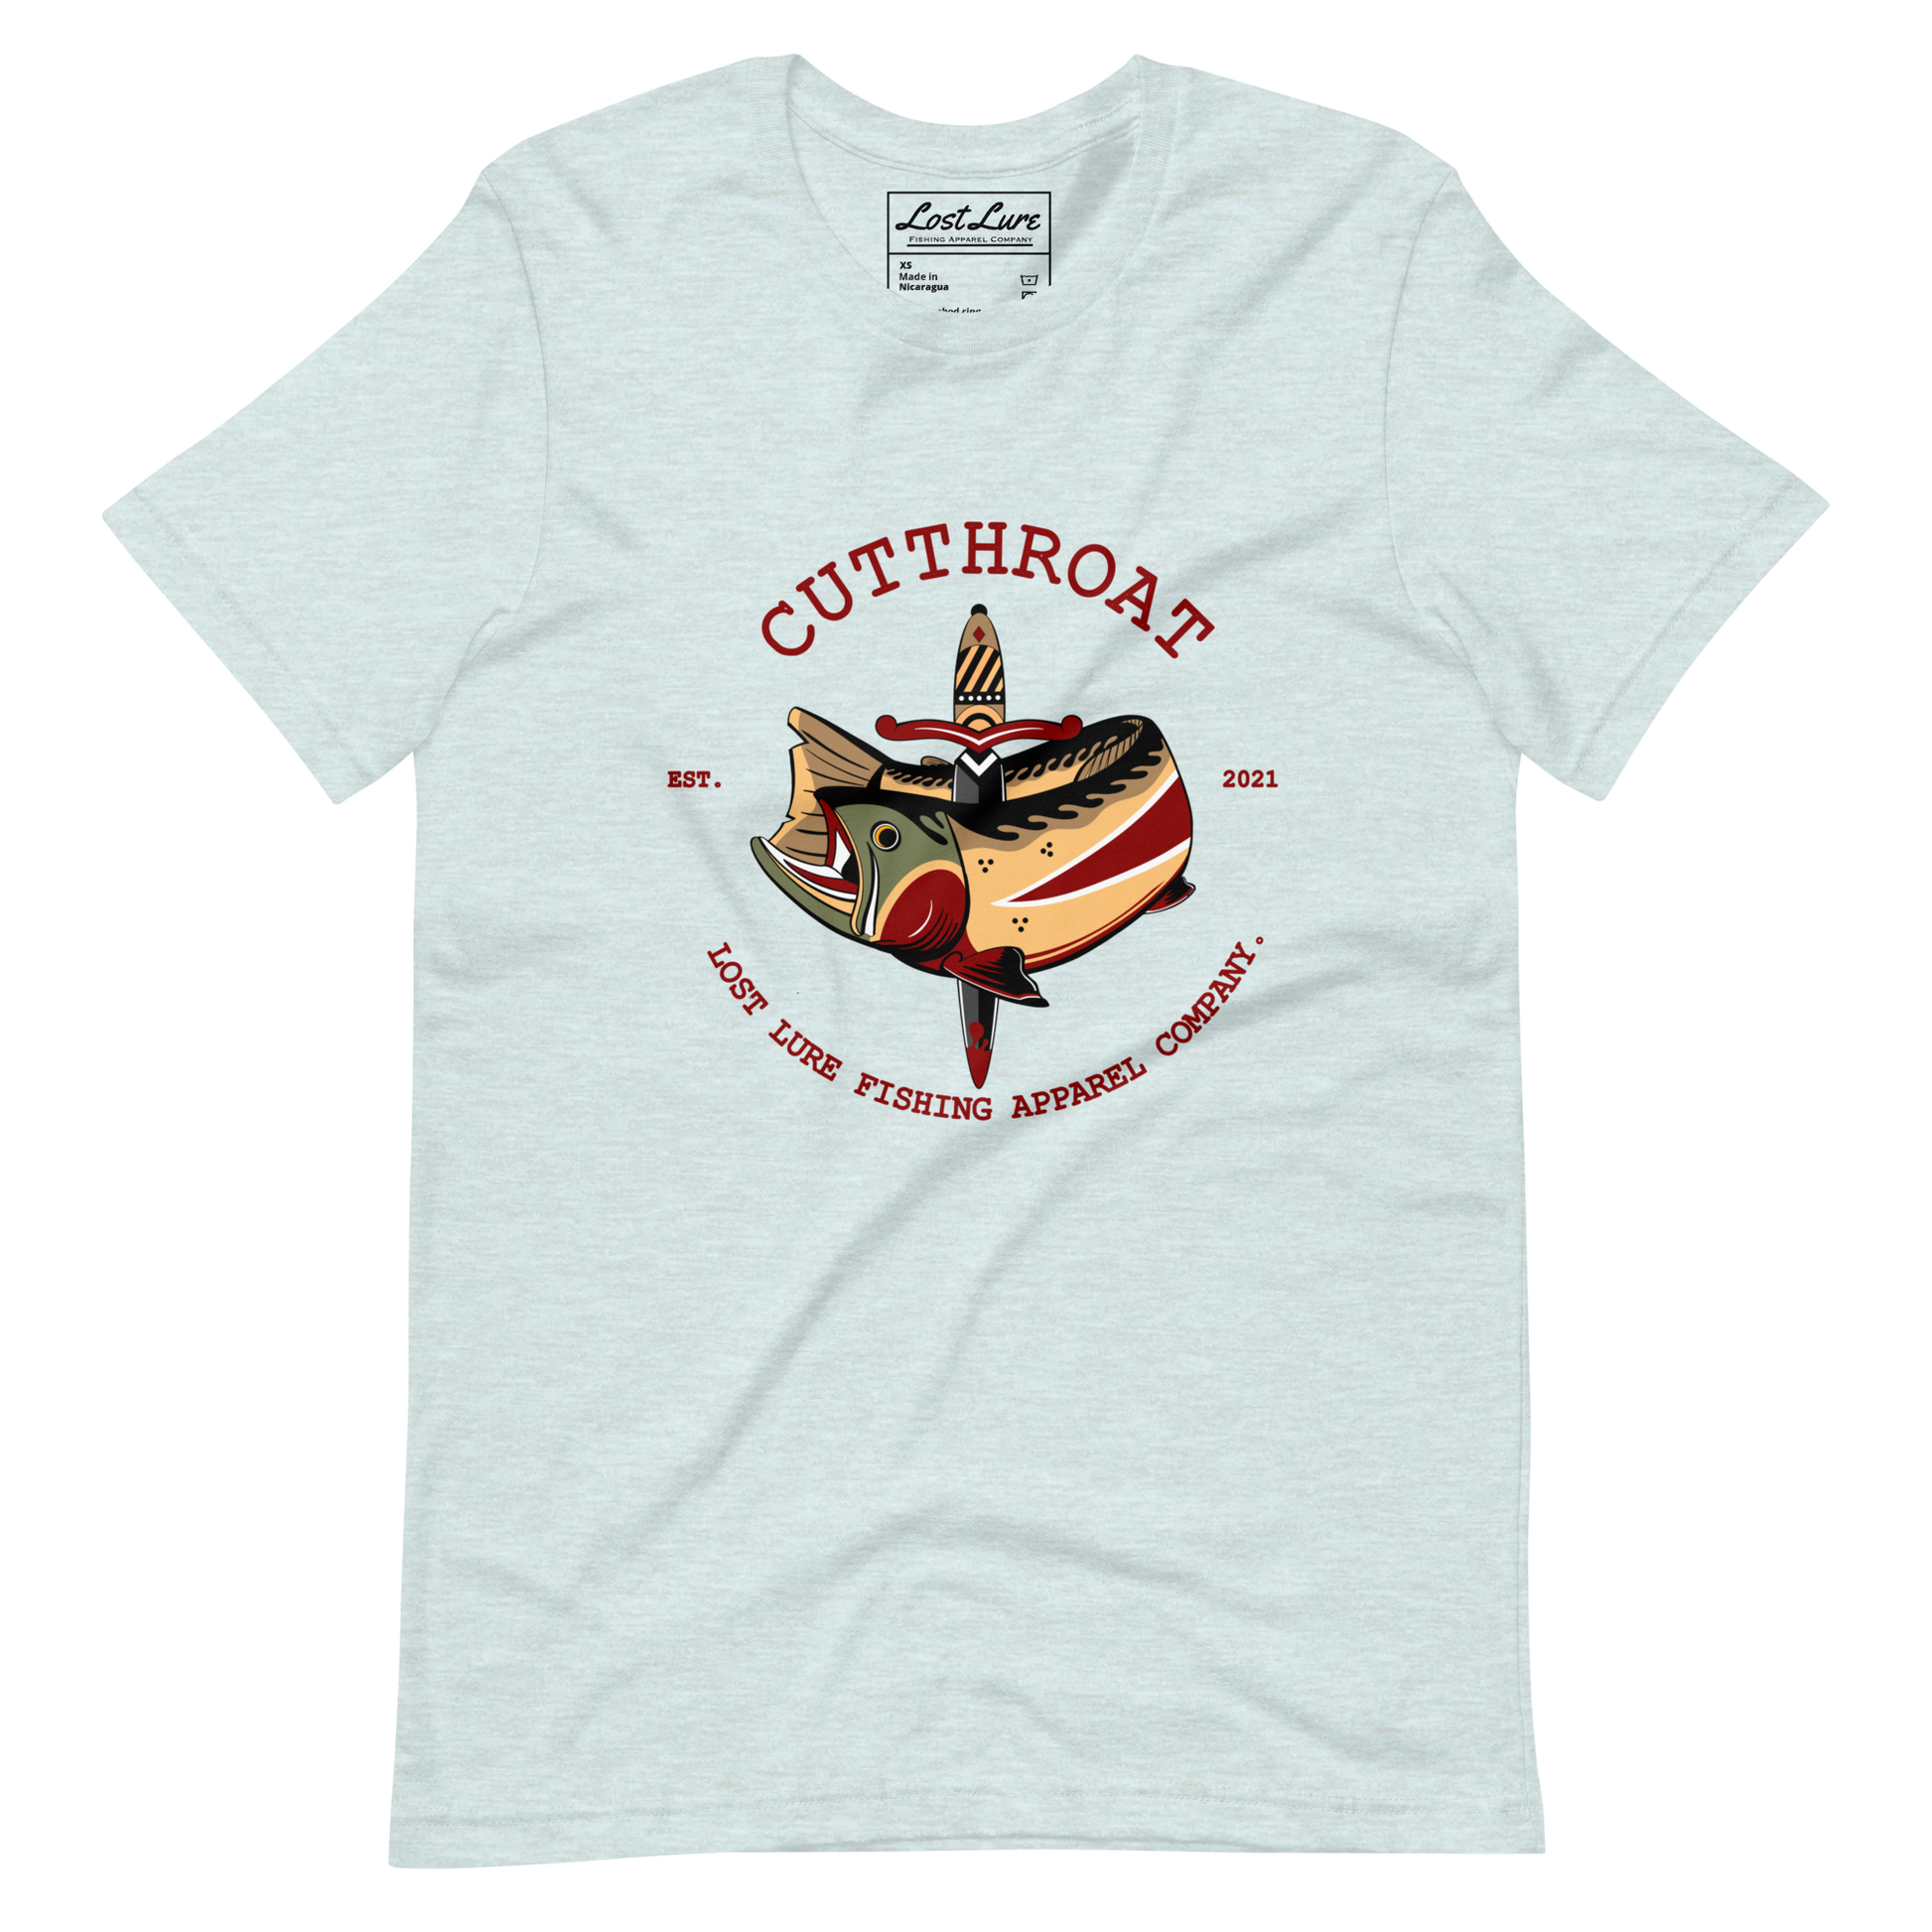 Cutthroat Trout fishing shirt. It’s an American traditional style design with a cutthroat trout and a dagger. The shirt reads Cutthroat trout, est. 2021, lost lure fishing apparel company. The fishing design is on the front of the shirt. Light blue fishing shirt